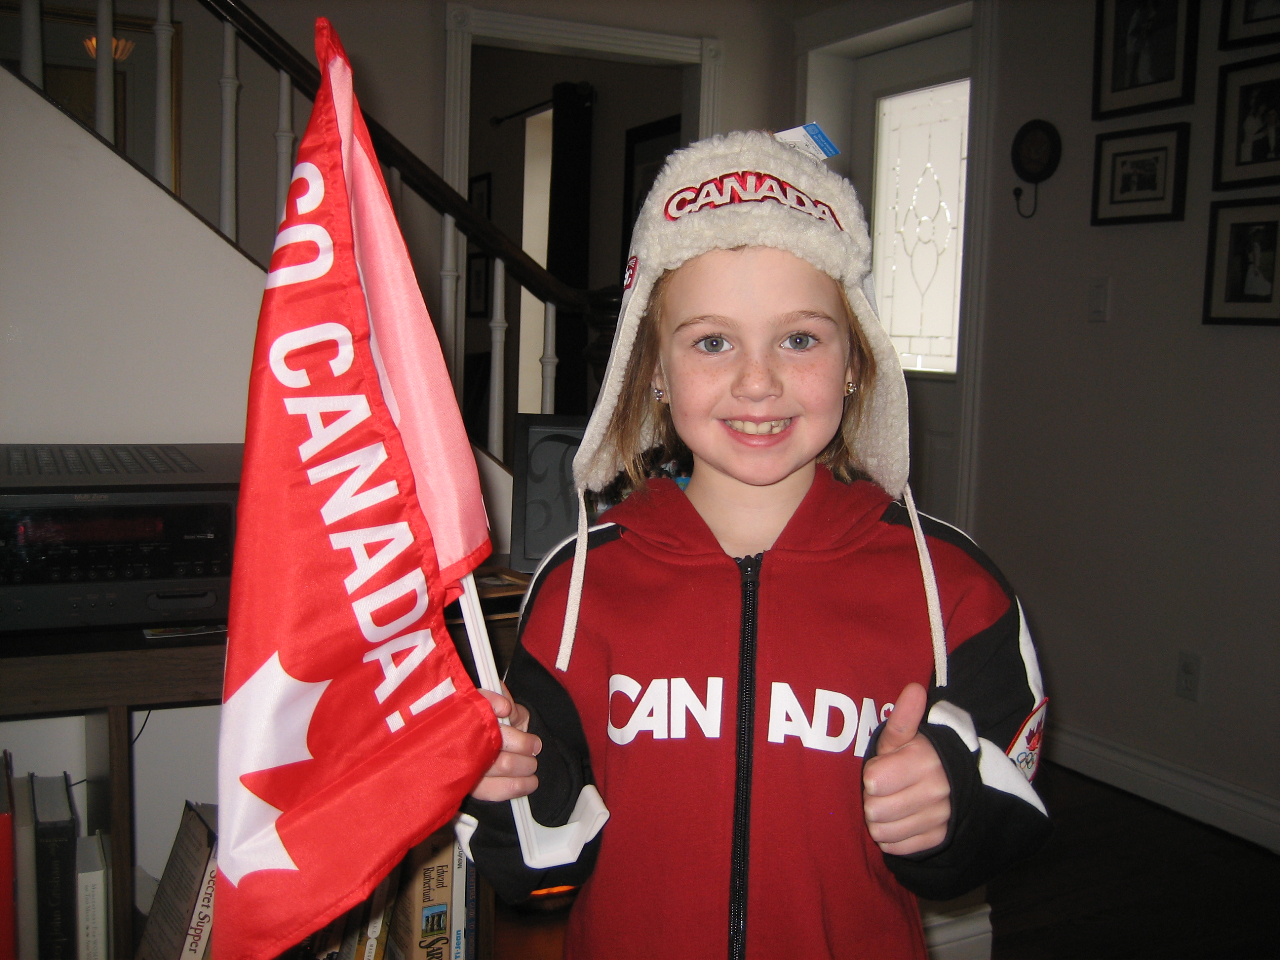 Eva attended the Vancouver Olympics as her wish